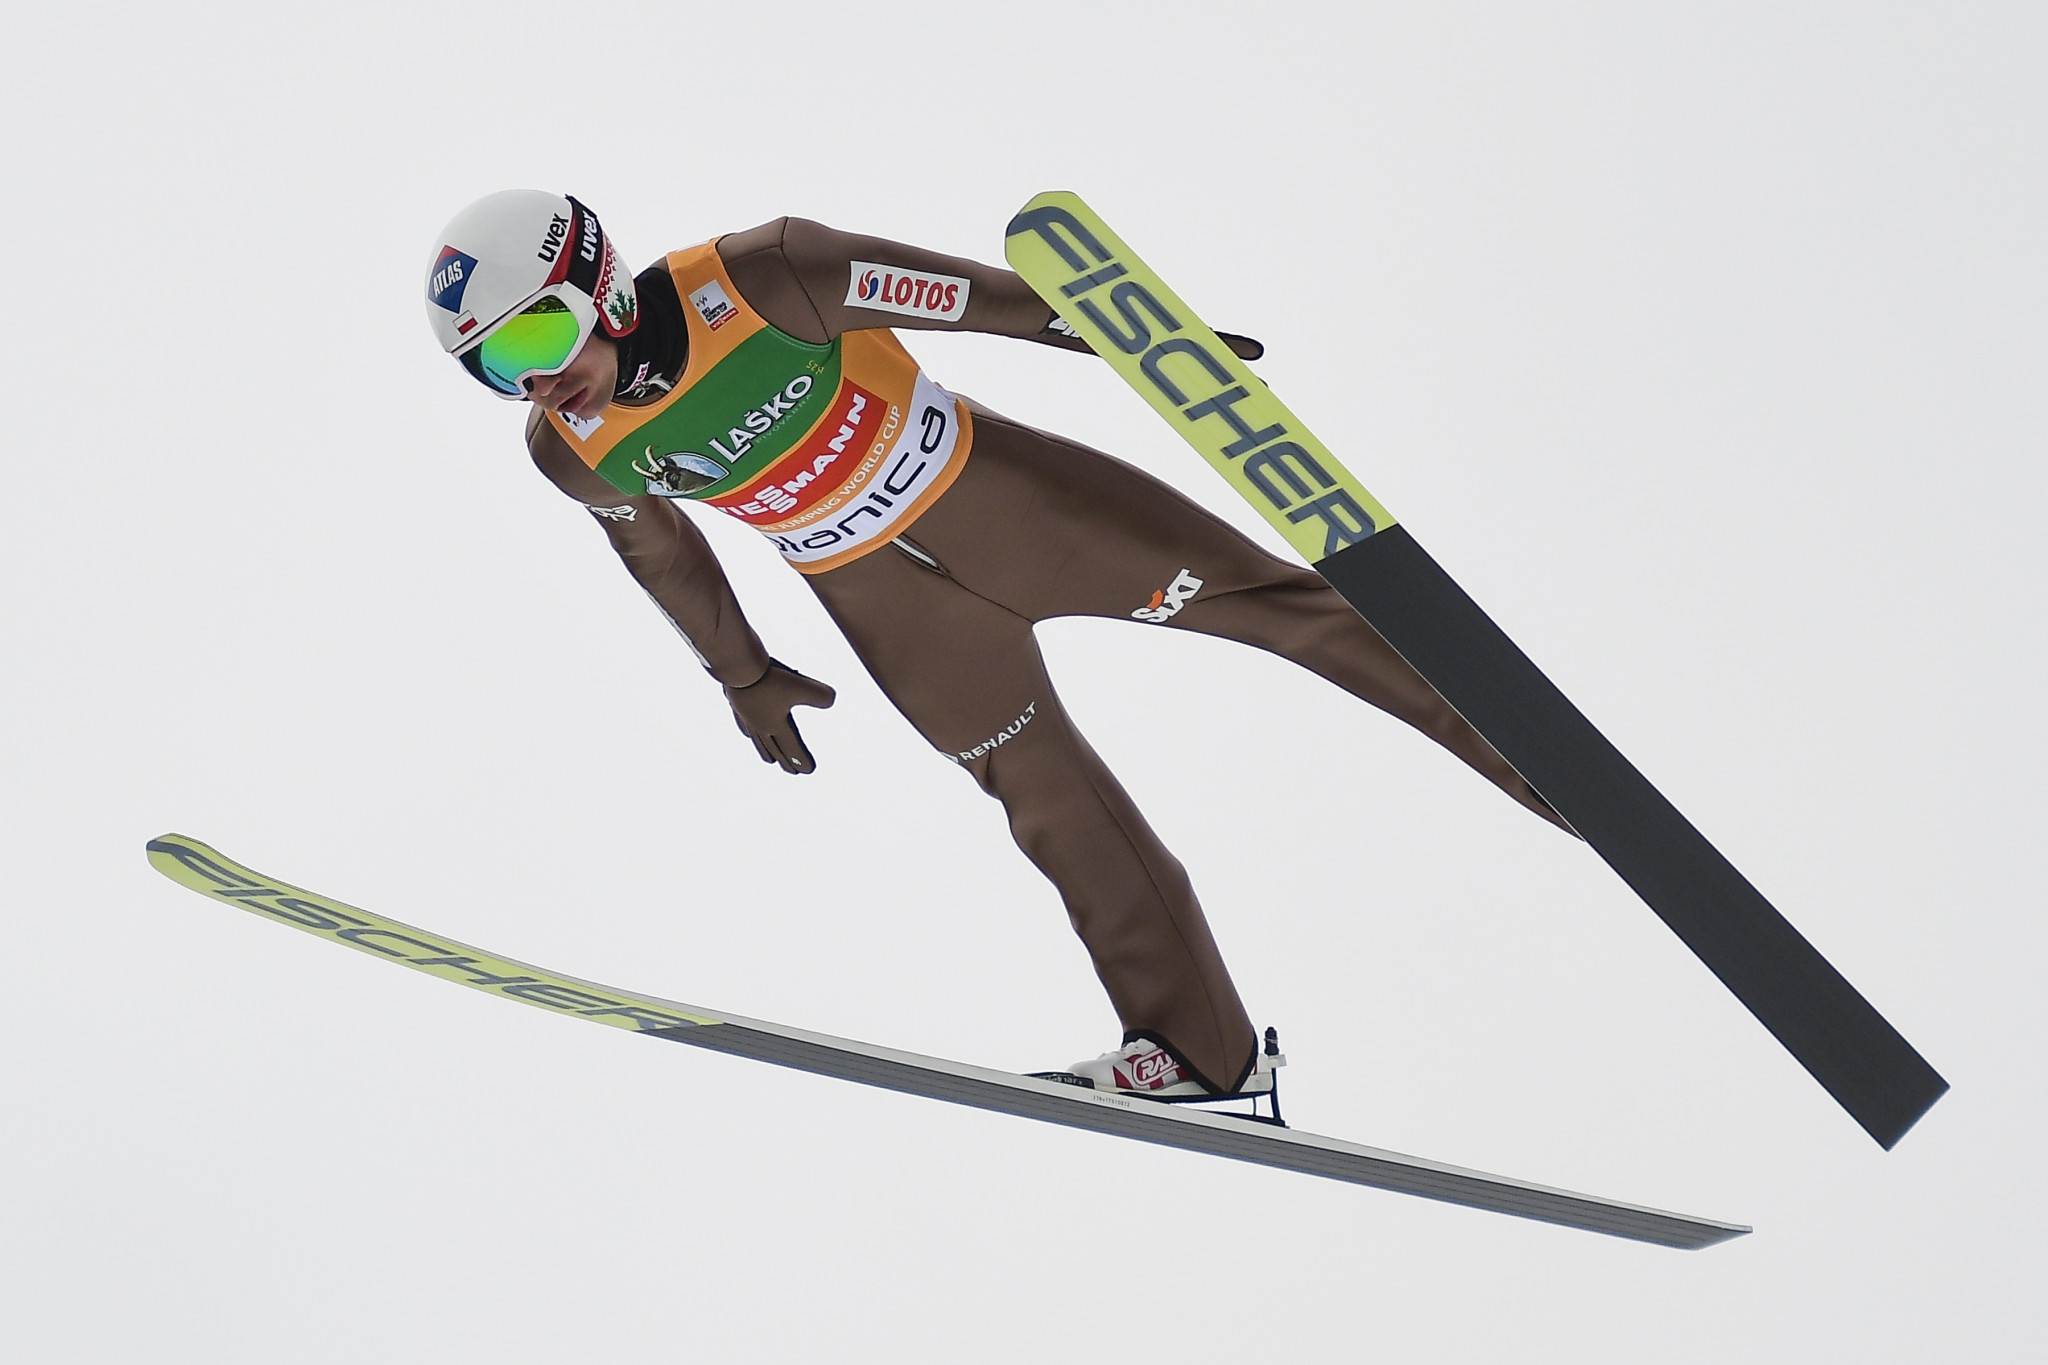 Poland's Kamil Stoch, the winner in Wisla last year, finished fourth ©Getty Images